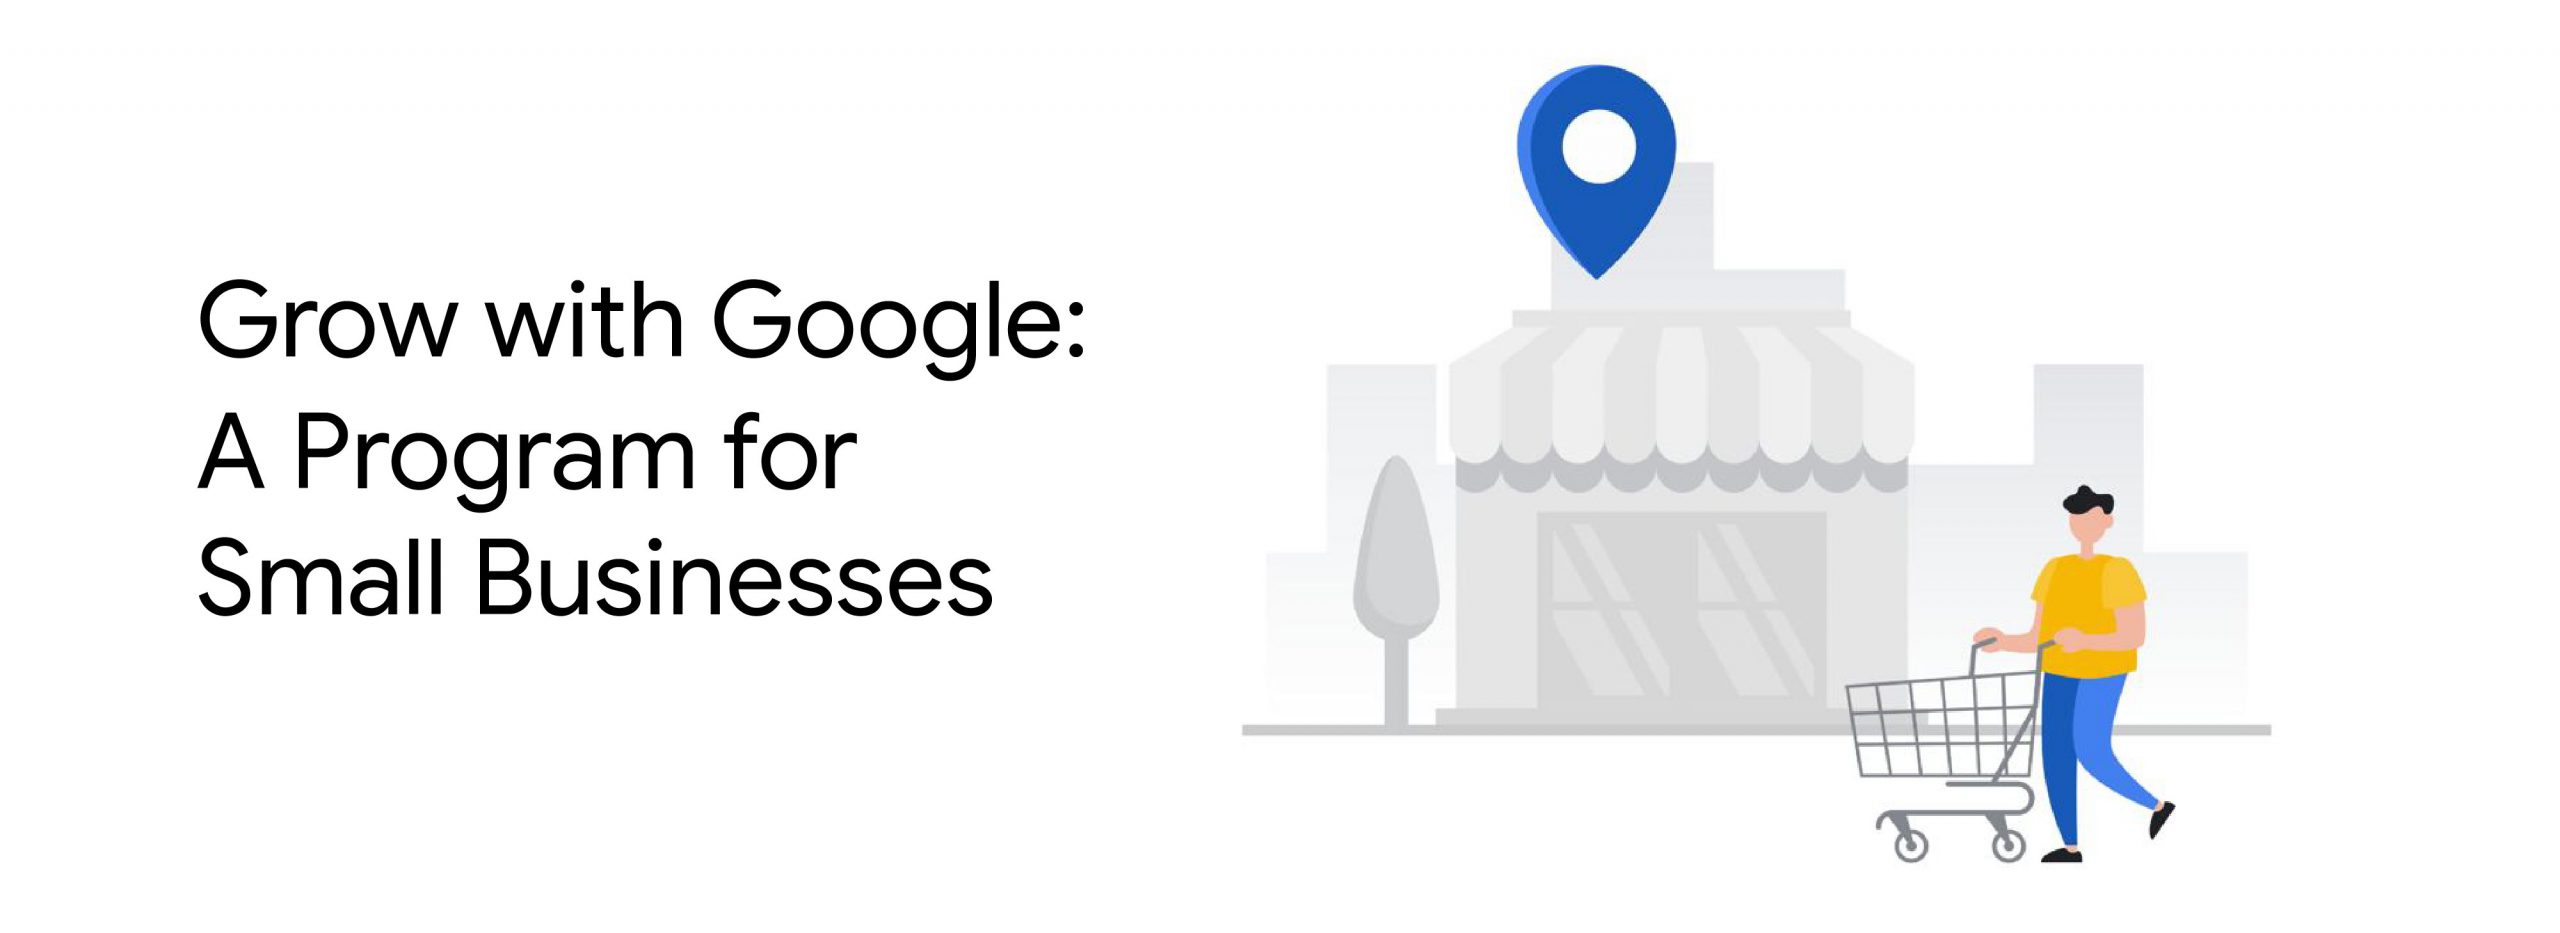 Grow with Google: A Program for Small Businesses